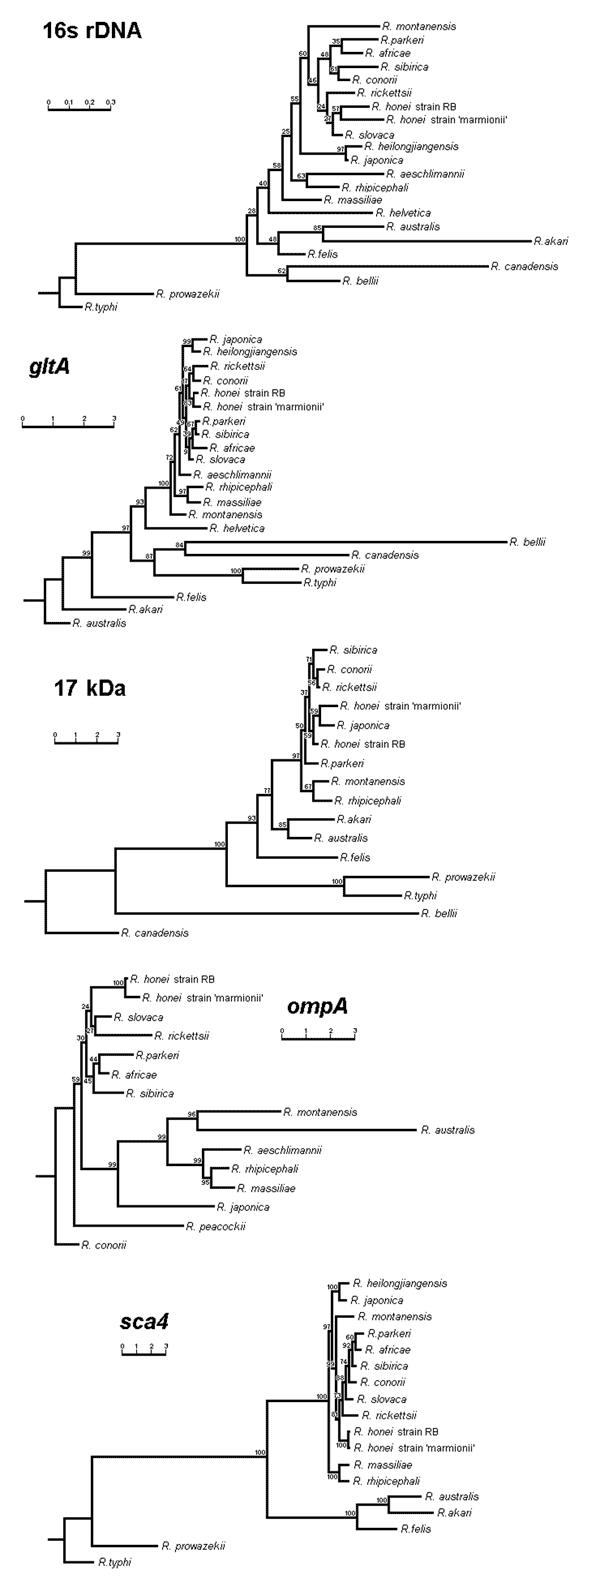 Phylogenetic trees obtained by a neighbor-joining analysis of the 16s RNA, gltA, 17-kDa, ompA, and Sca4 antigen genes. Bootstrap values from 100 analyses are shown at the node of each branch.